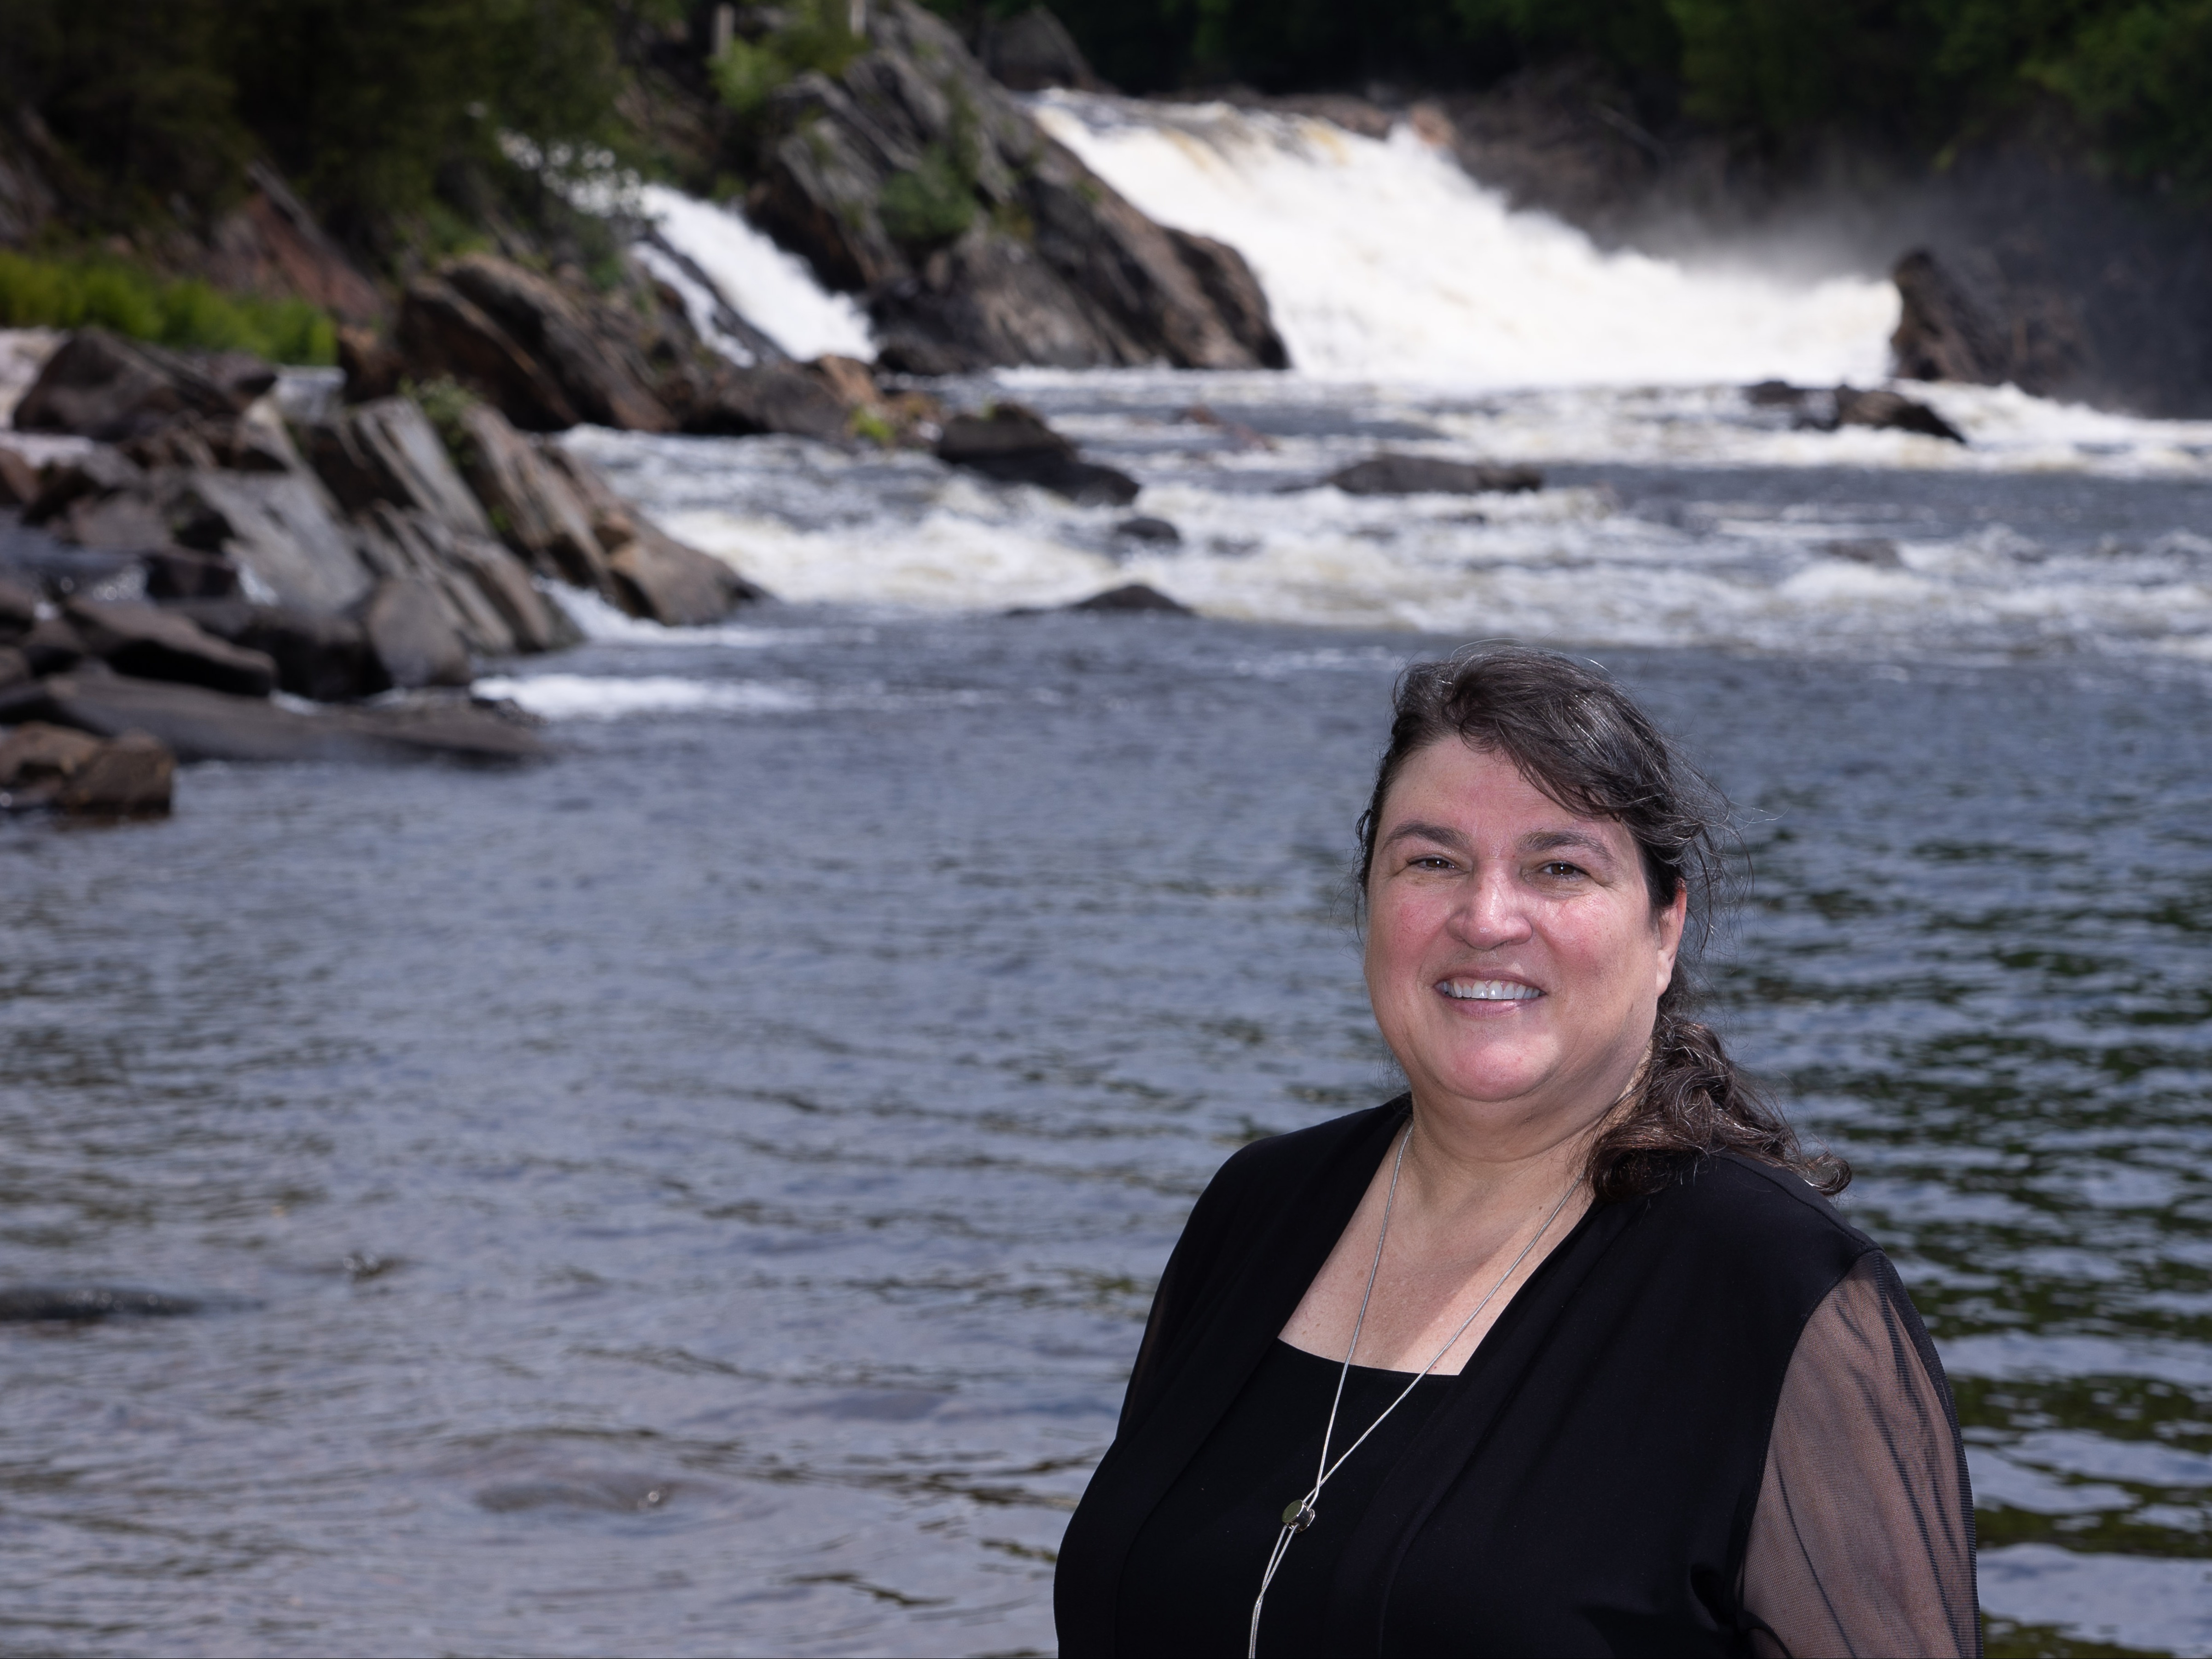 Woman smiling in front of a river with a small waterfall in the background.